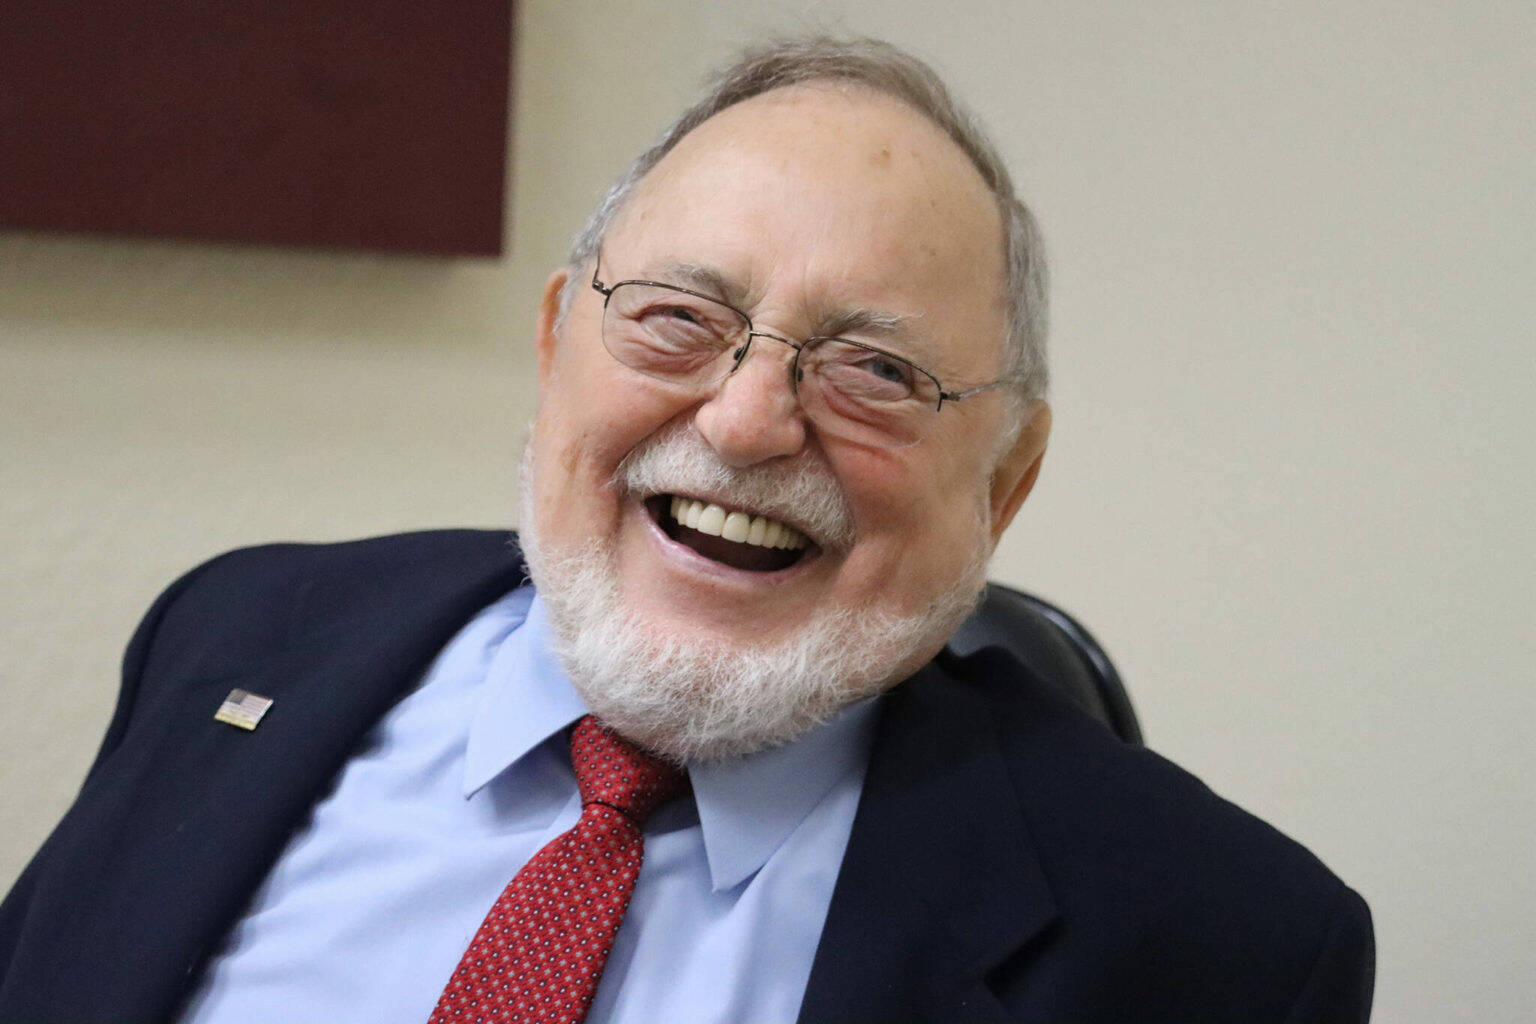 Rep. Don Young smiles during a sit-down in the Juneau Empire’s offices last June. Young died on Friday, according to the longtime U.S. representative’s office. (Ben Hohenstatt / Juneau Empire File)